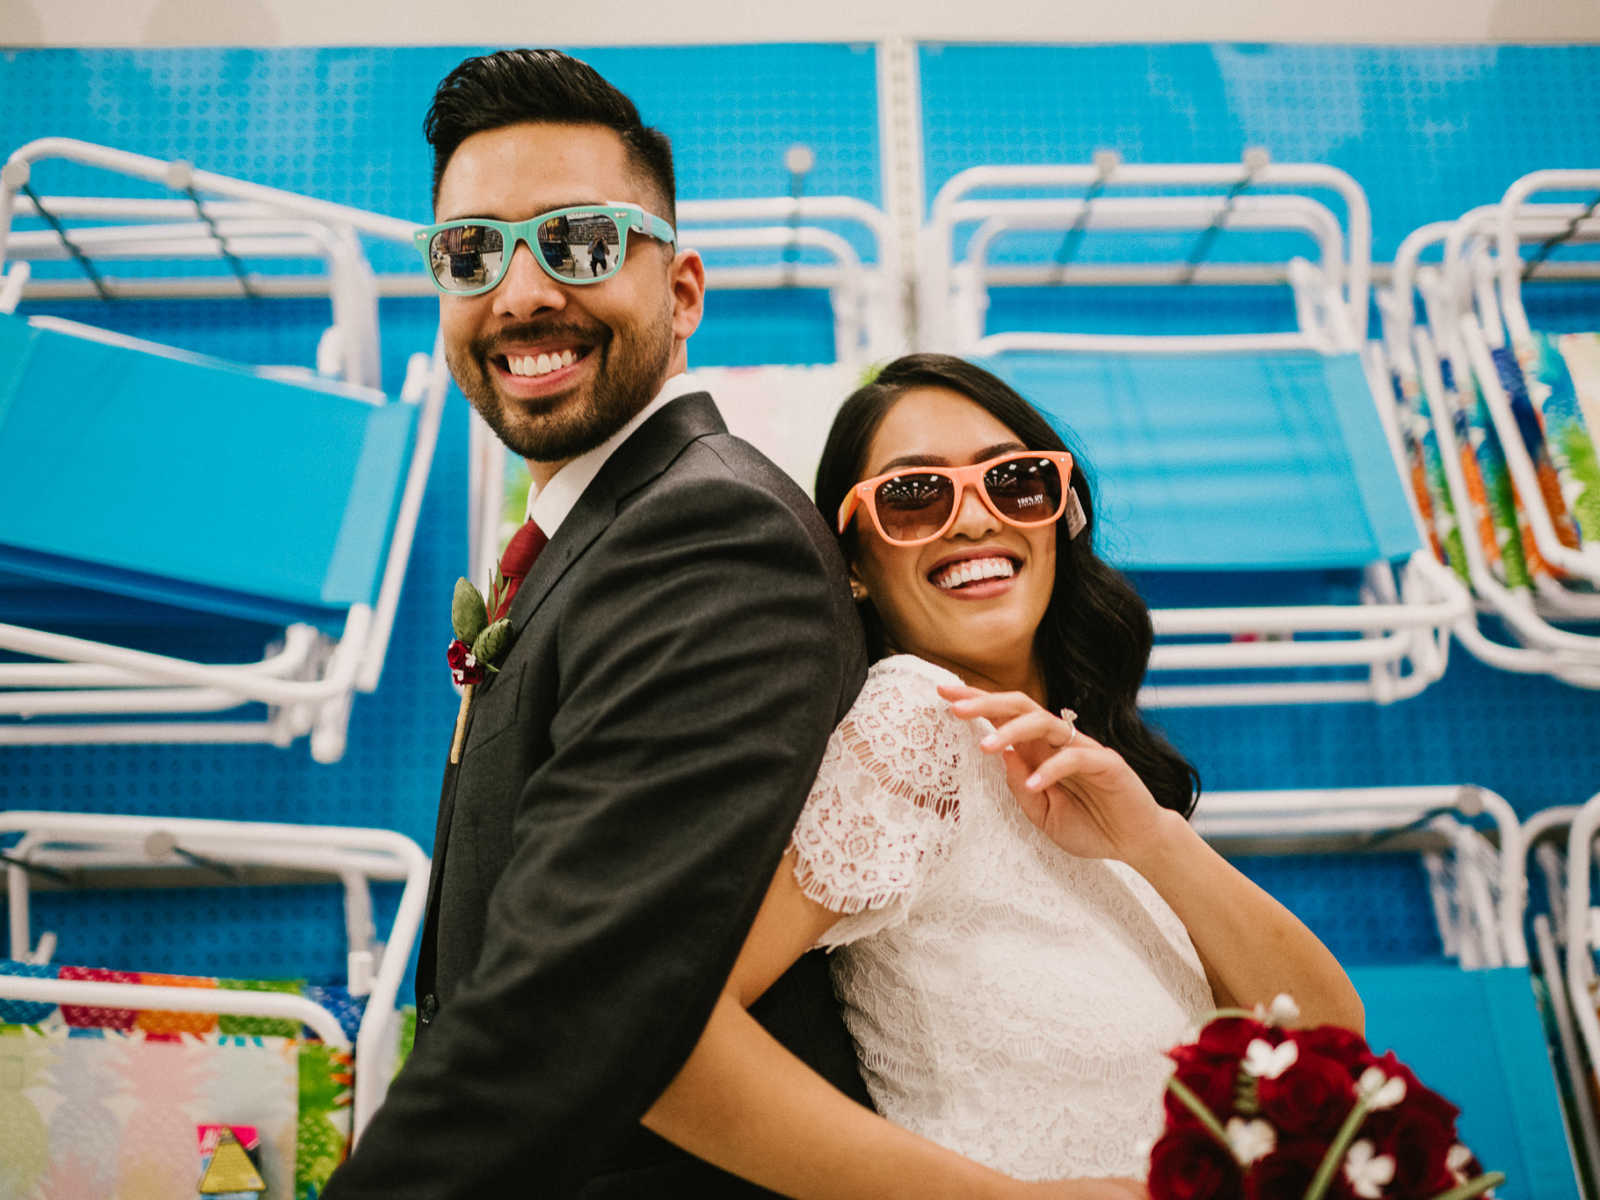 Bride and groom smile with sunglasses on in beach chair aisle of Target